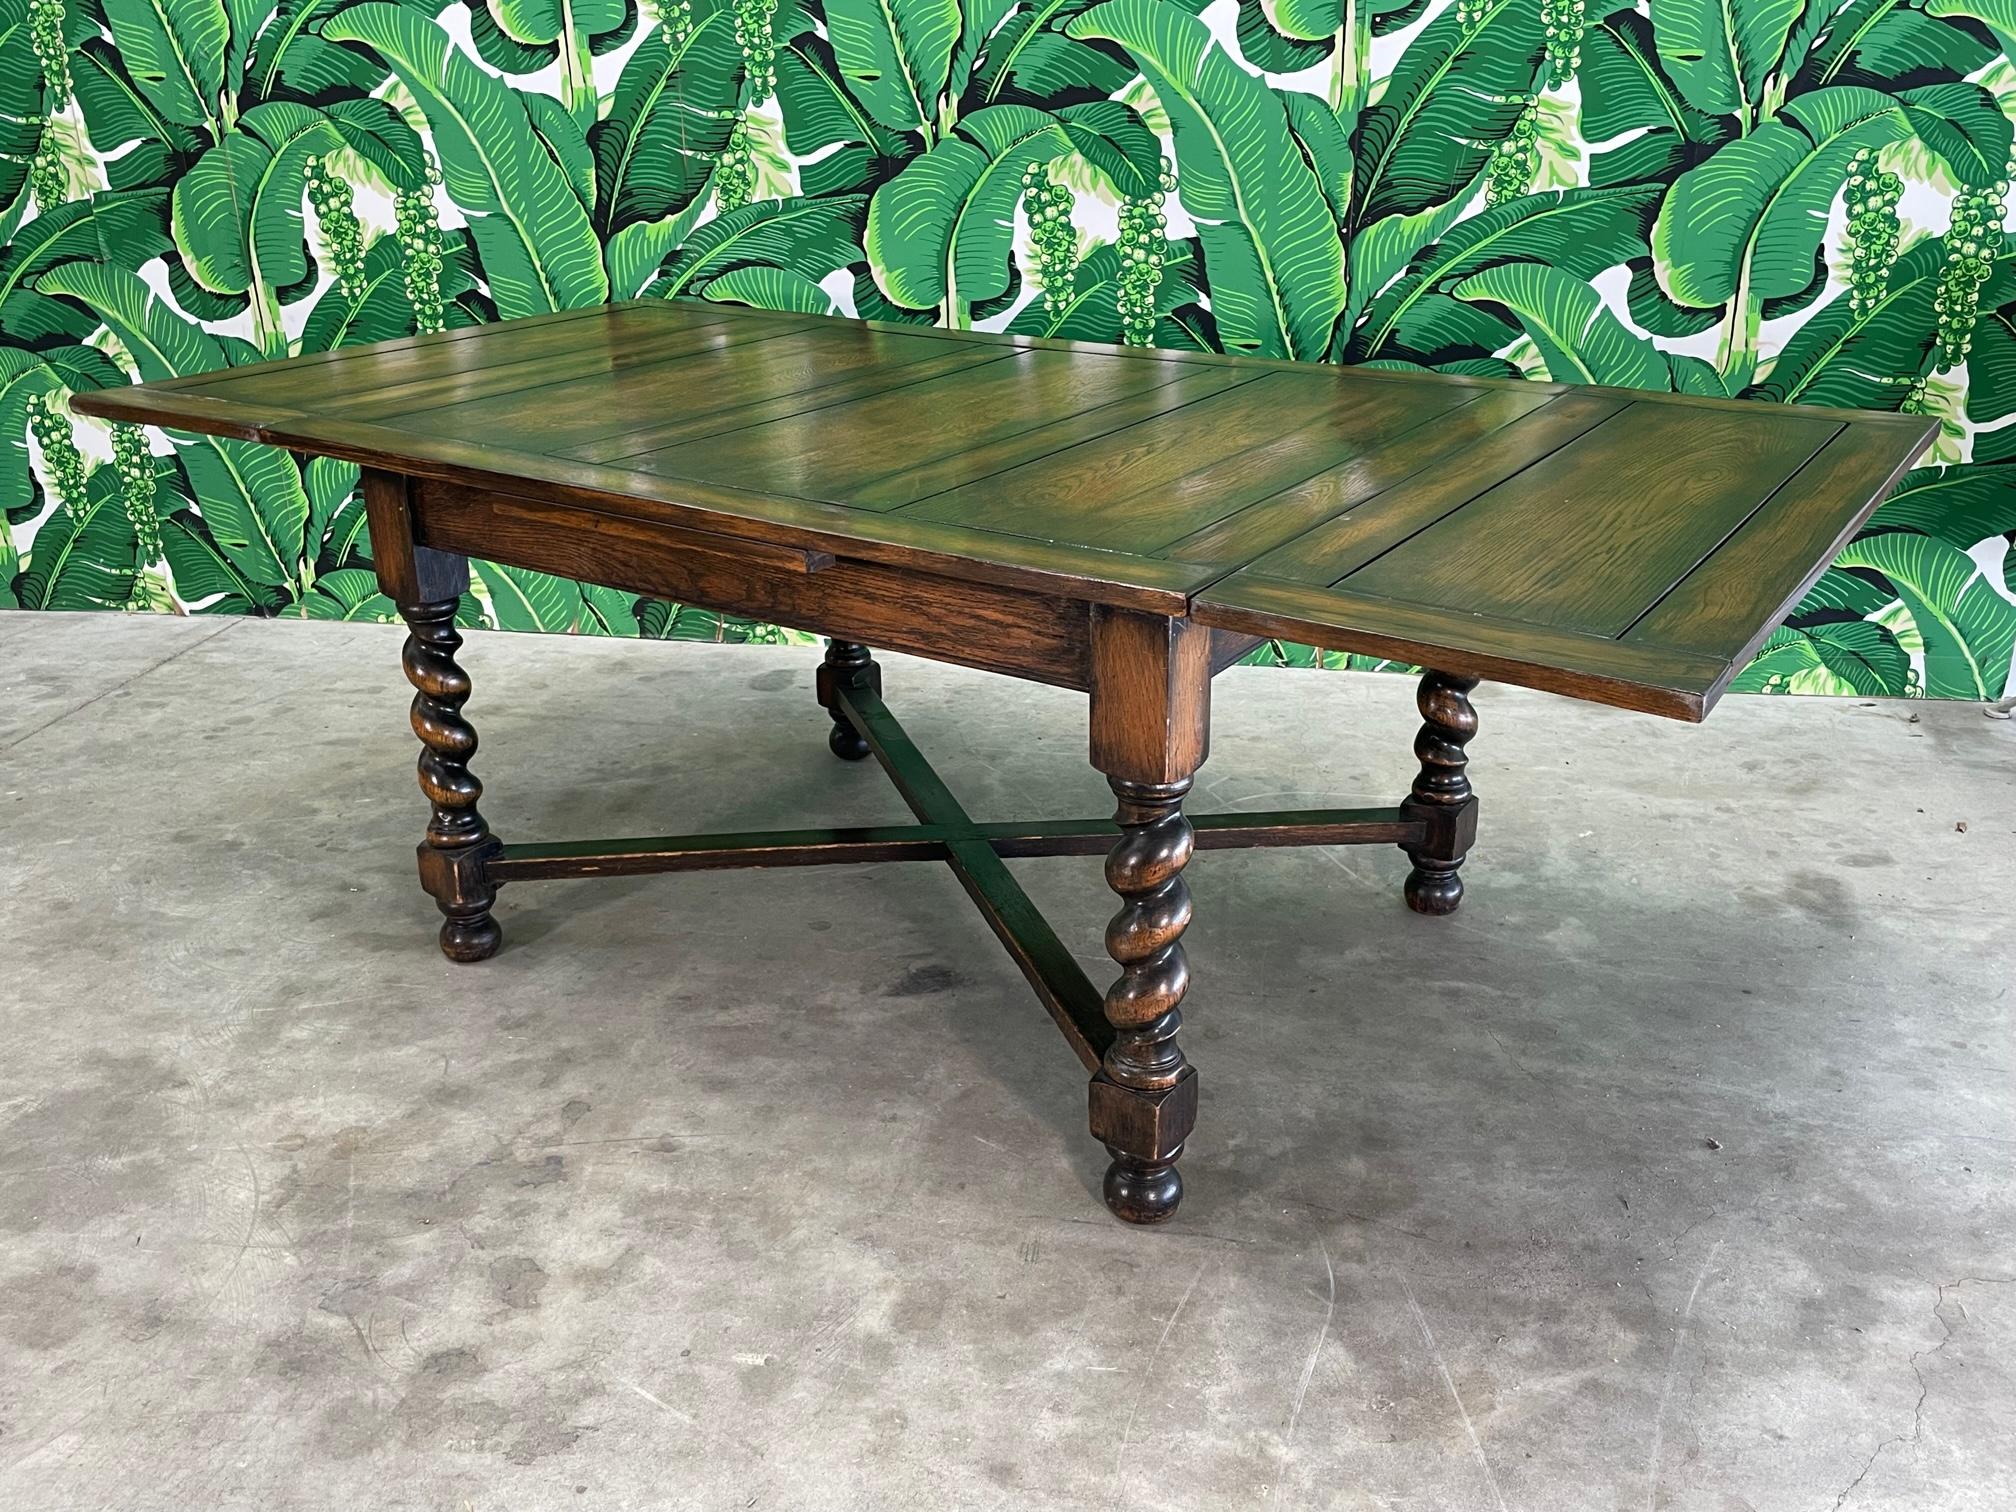 Expandable Spanish Colonial dining table features Solomonic carved legs and a hidden leaf at each end. Leaf pulls out to extend table 16